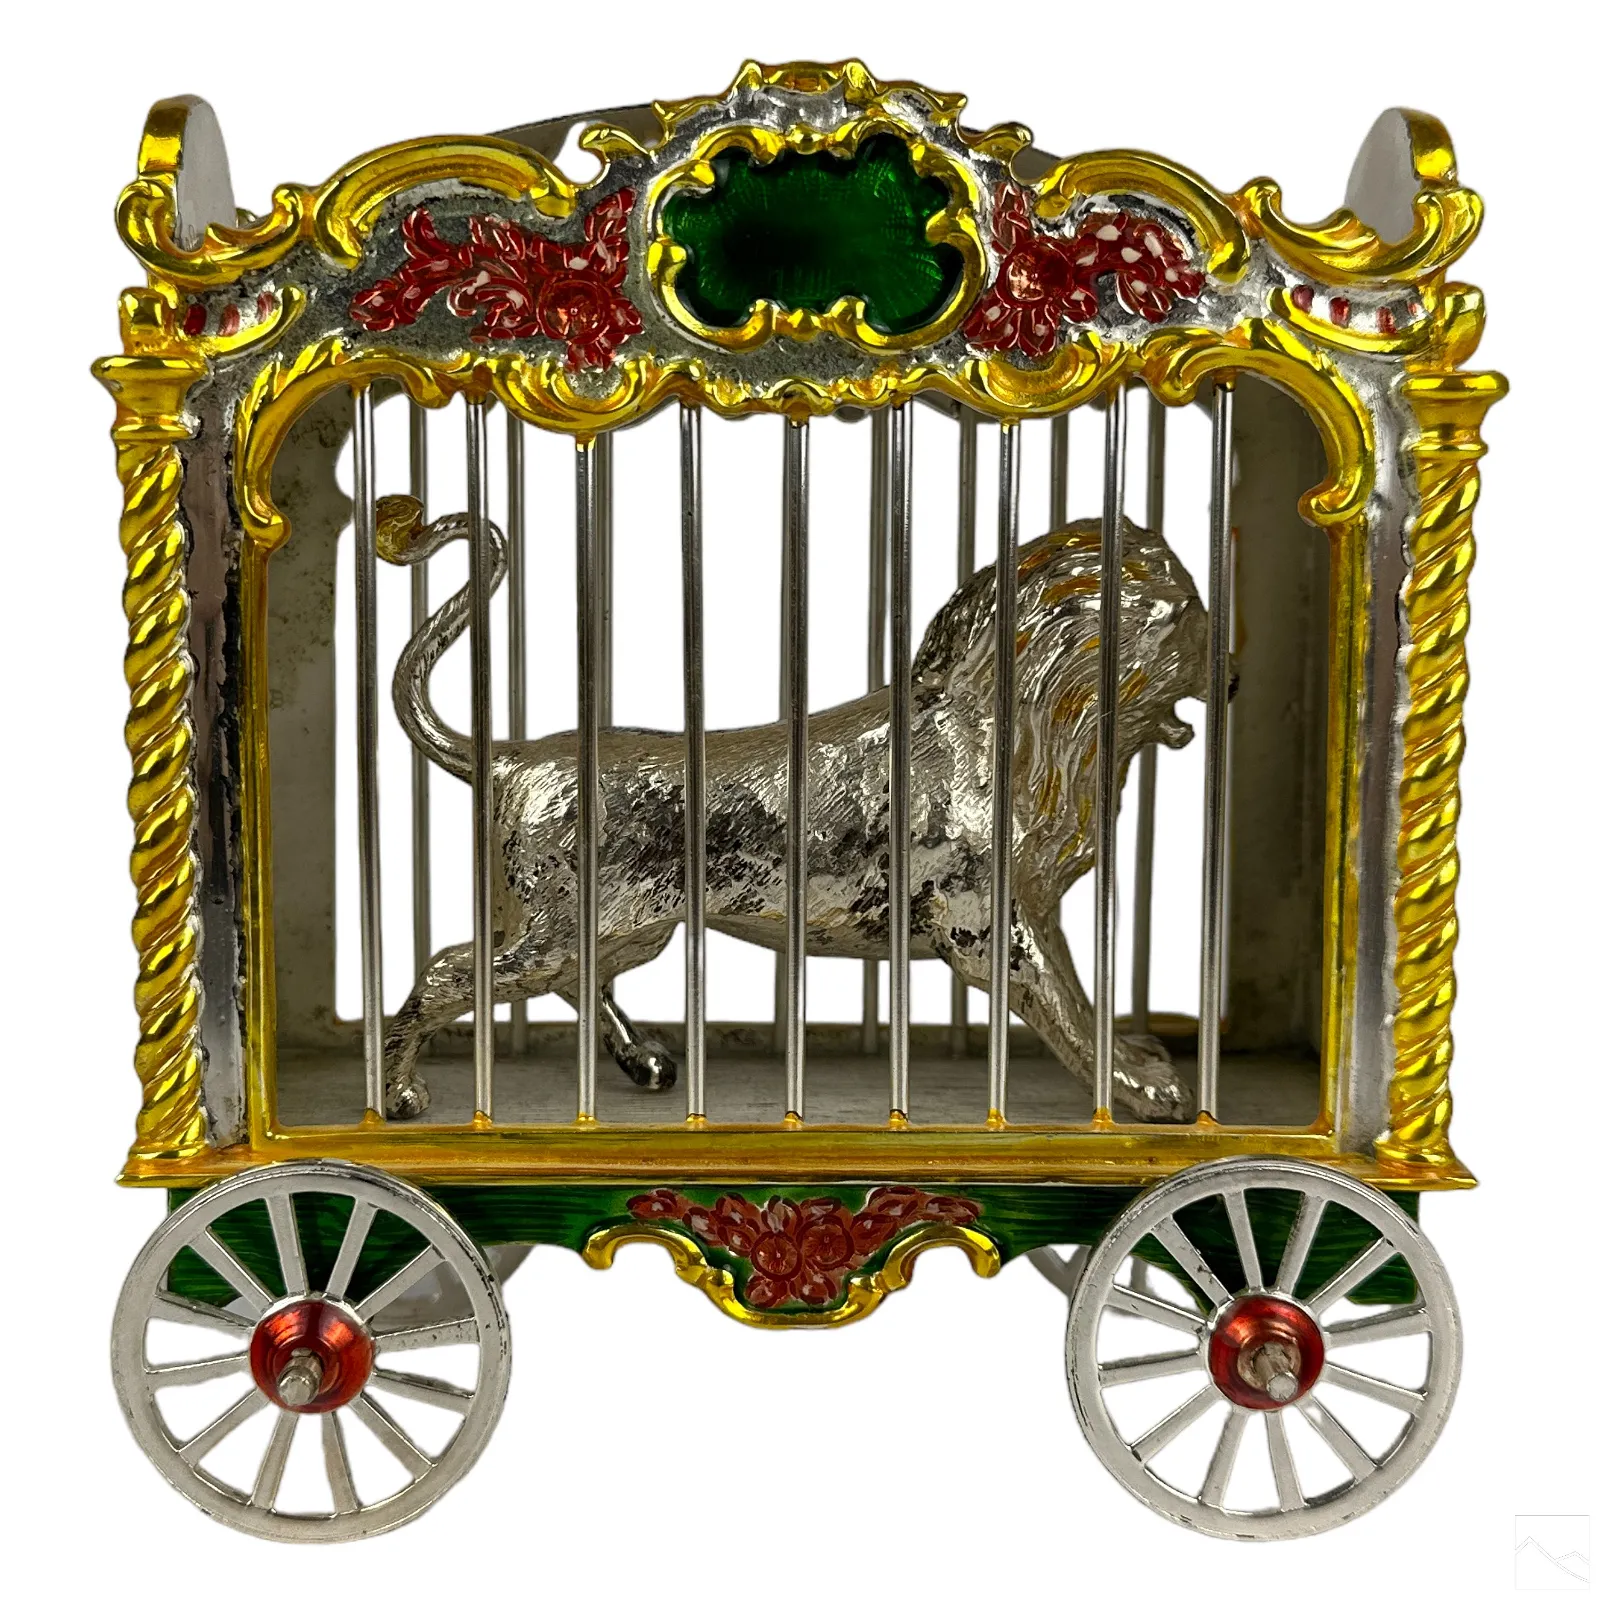 Gene Moore for Tiffany &#038; Co. Silver Circus Lion in Wagon leads our five auction highlights